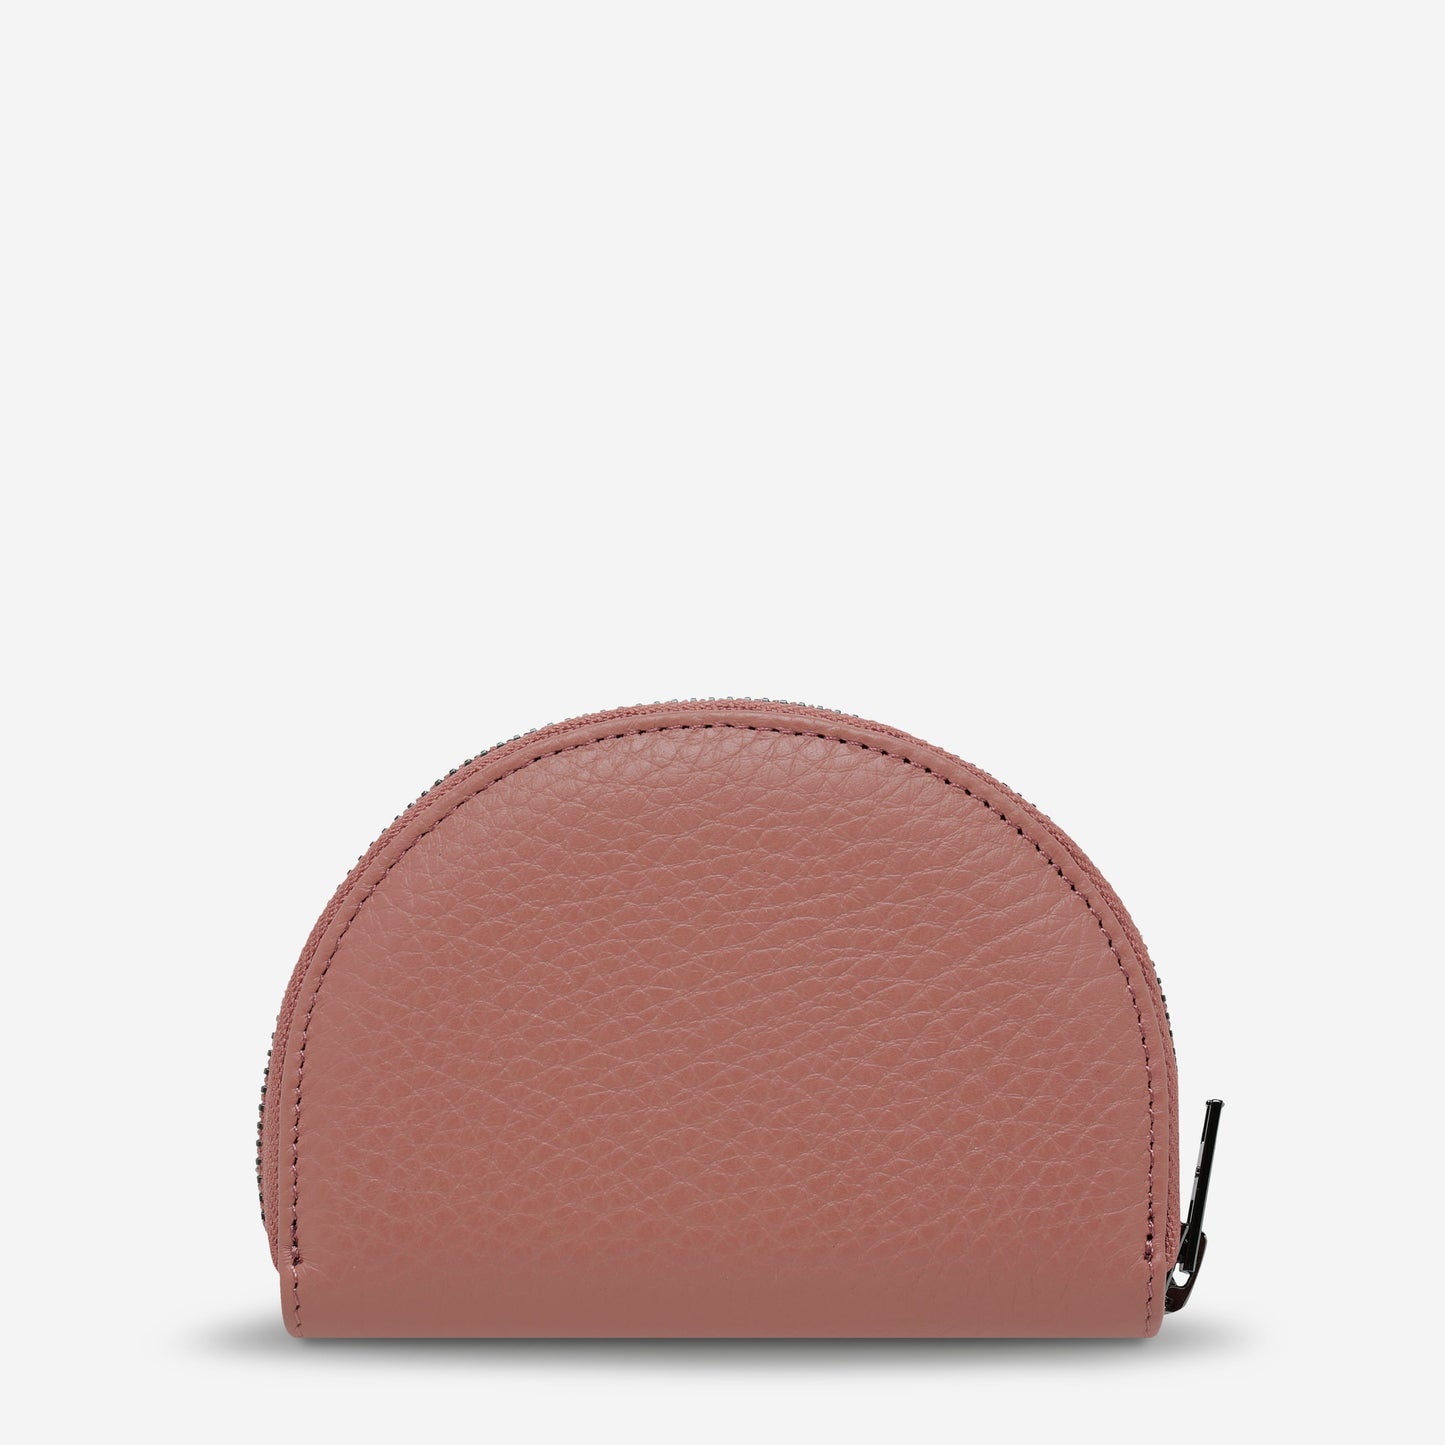 Lucid Leather Wallet - Dusty Rose